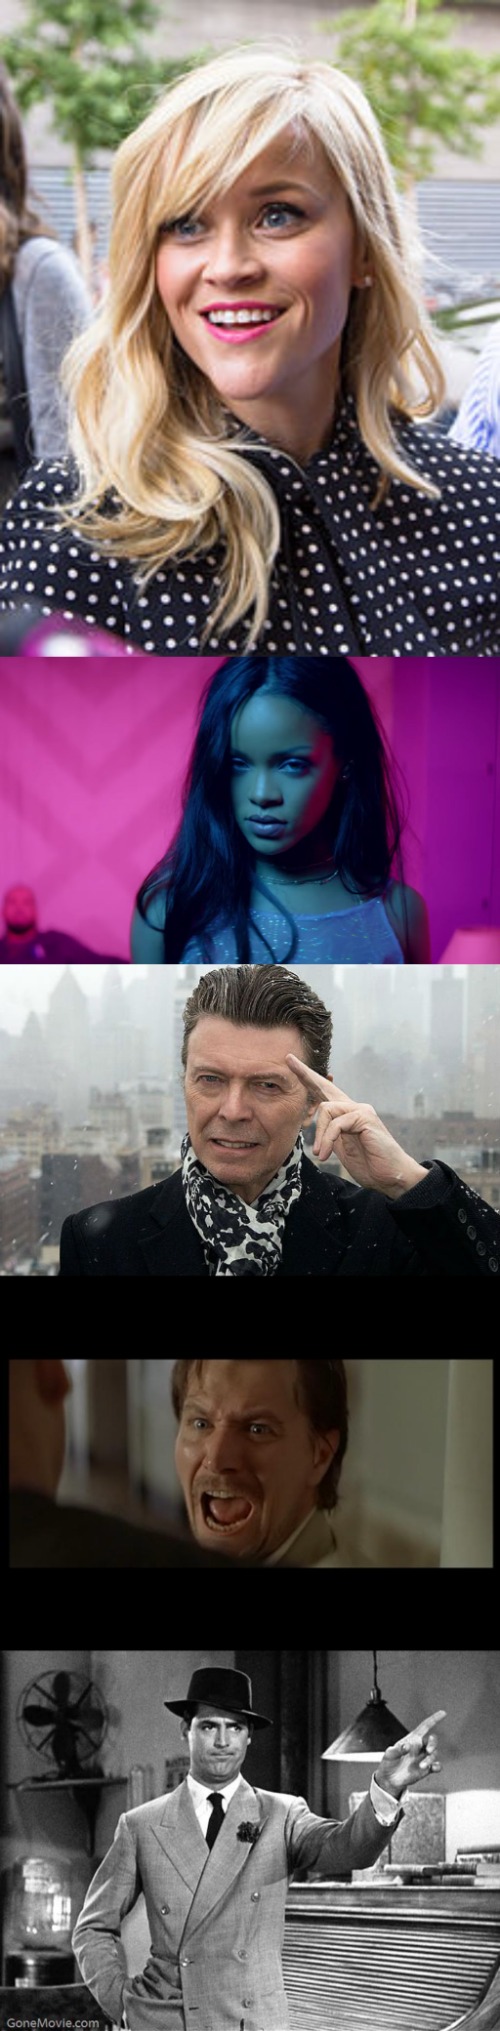 image tagged in reese witherspoon,rihanna work,david bowie,gary oldman everyone,get out | made w/ Imgflip meme maker